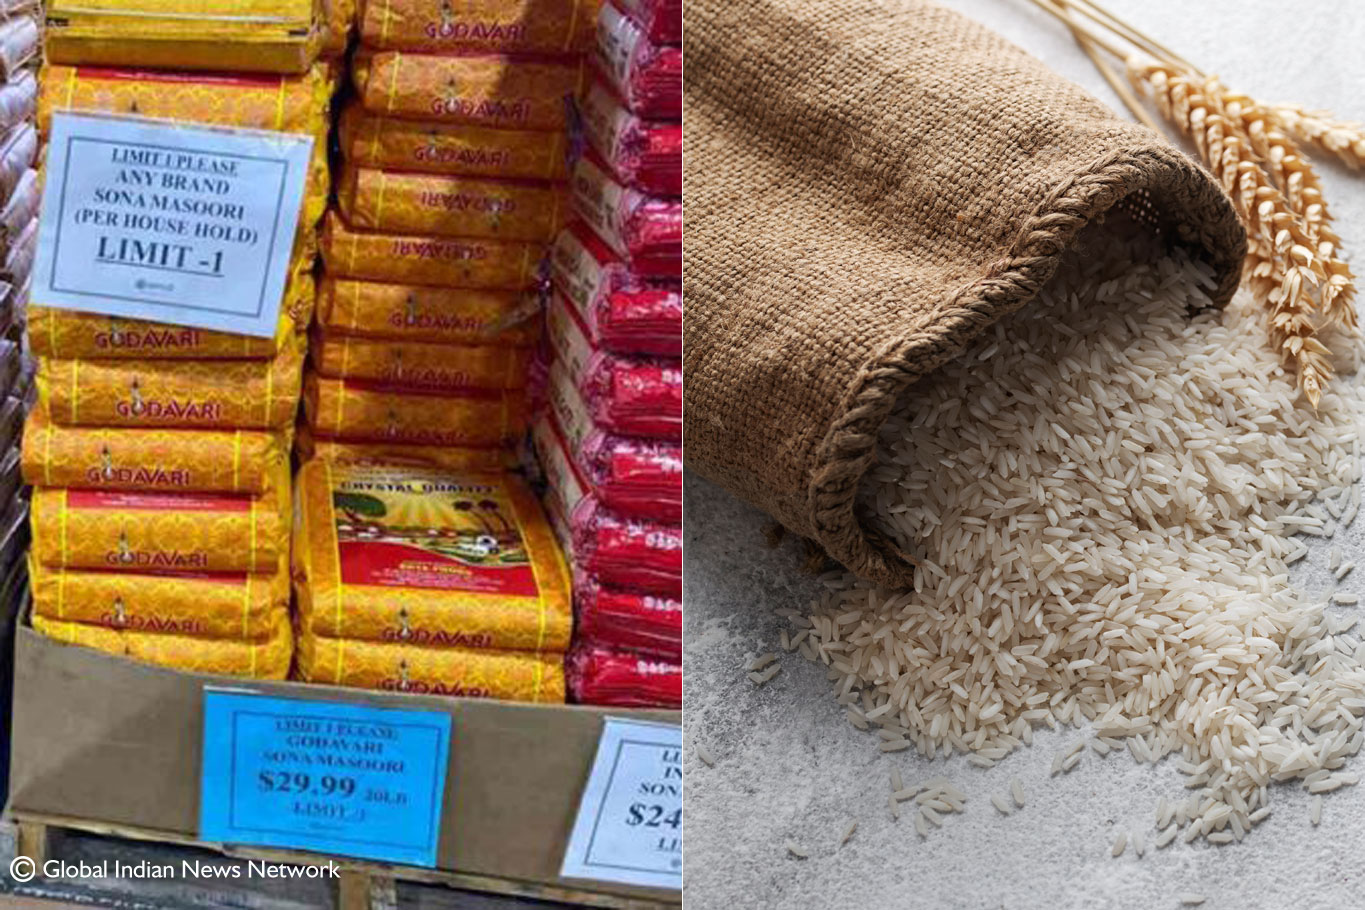 Ban on Rice Export Sparks Panic Purchases Among NRIs in the US: Each Family Hoards 10-15 Bags